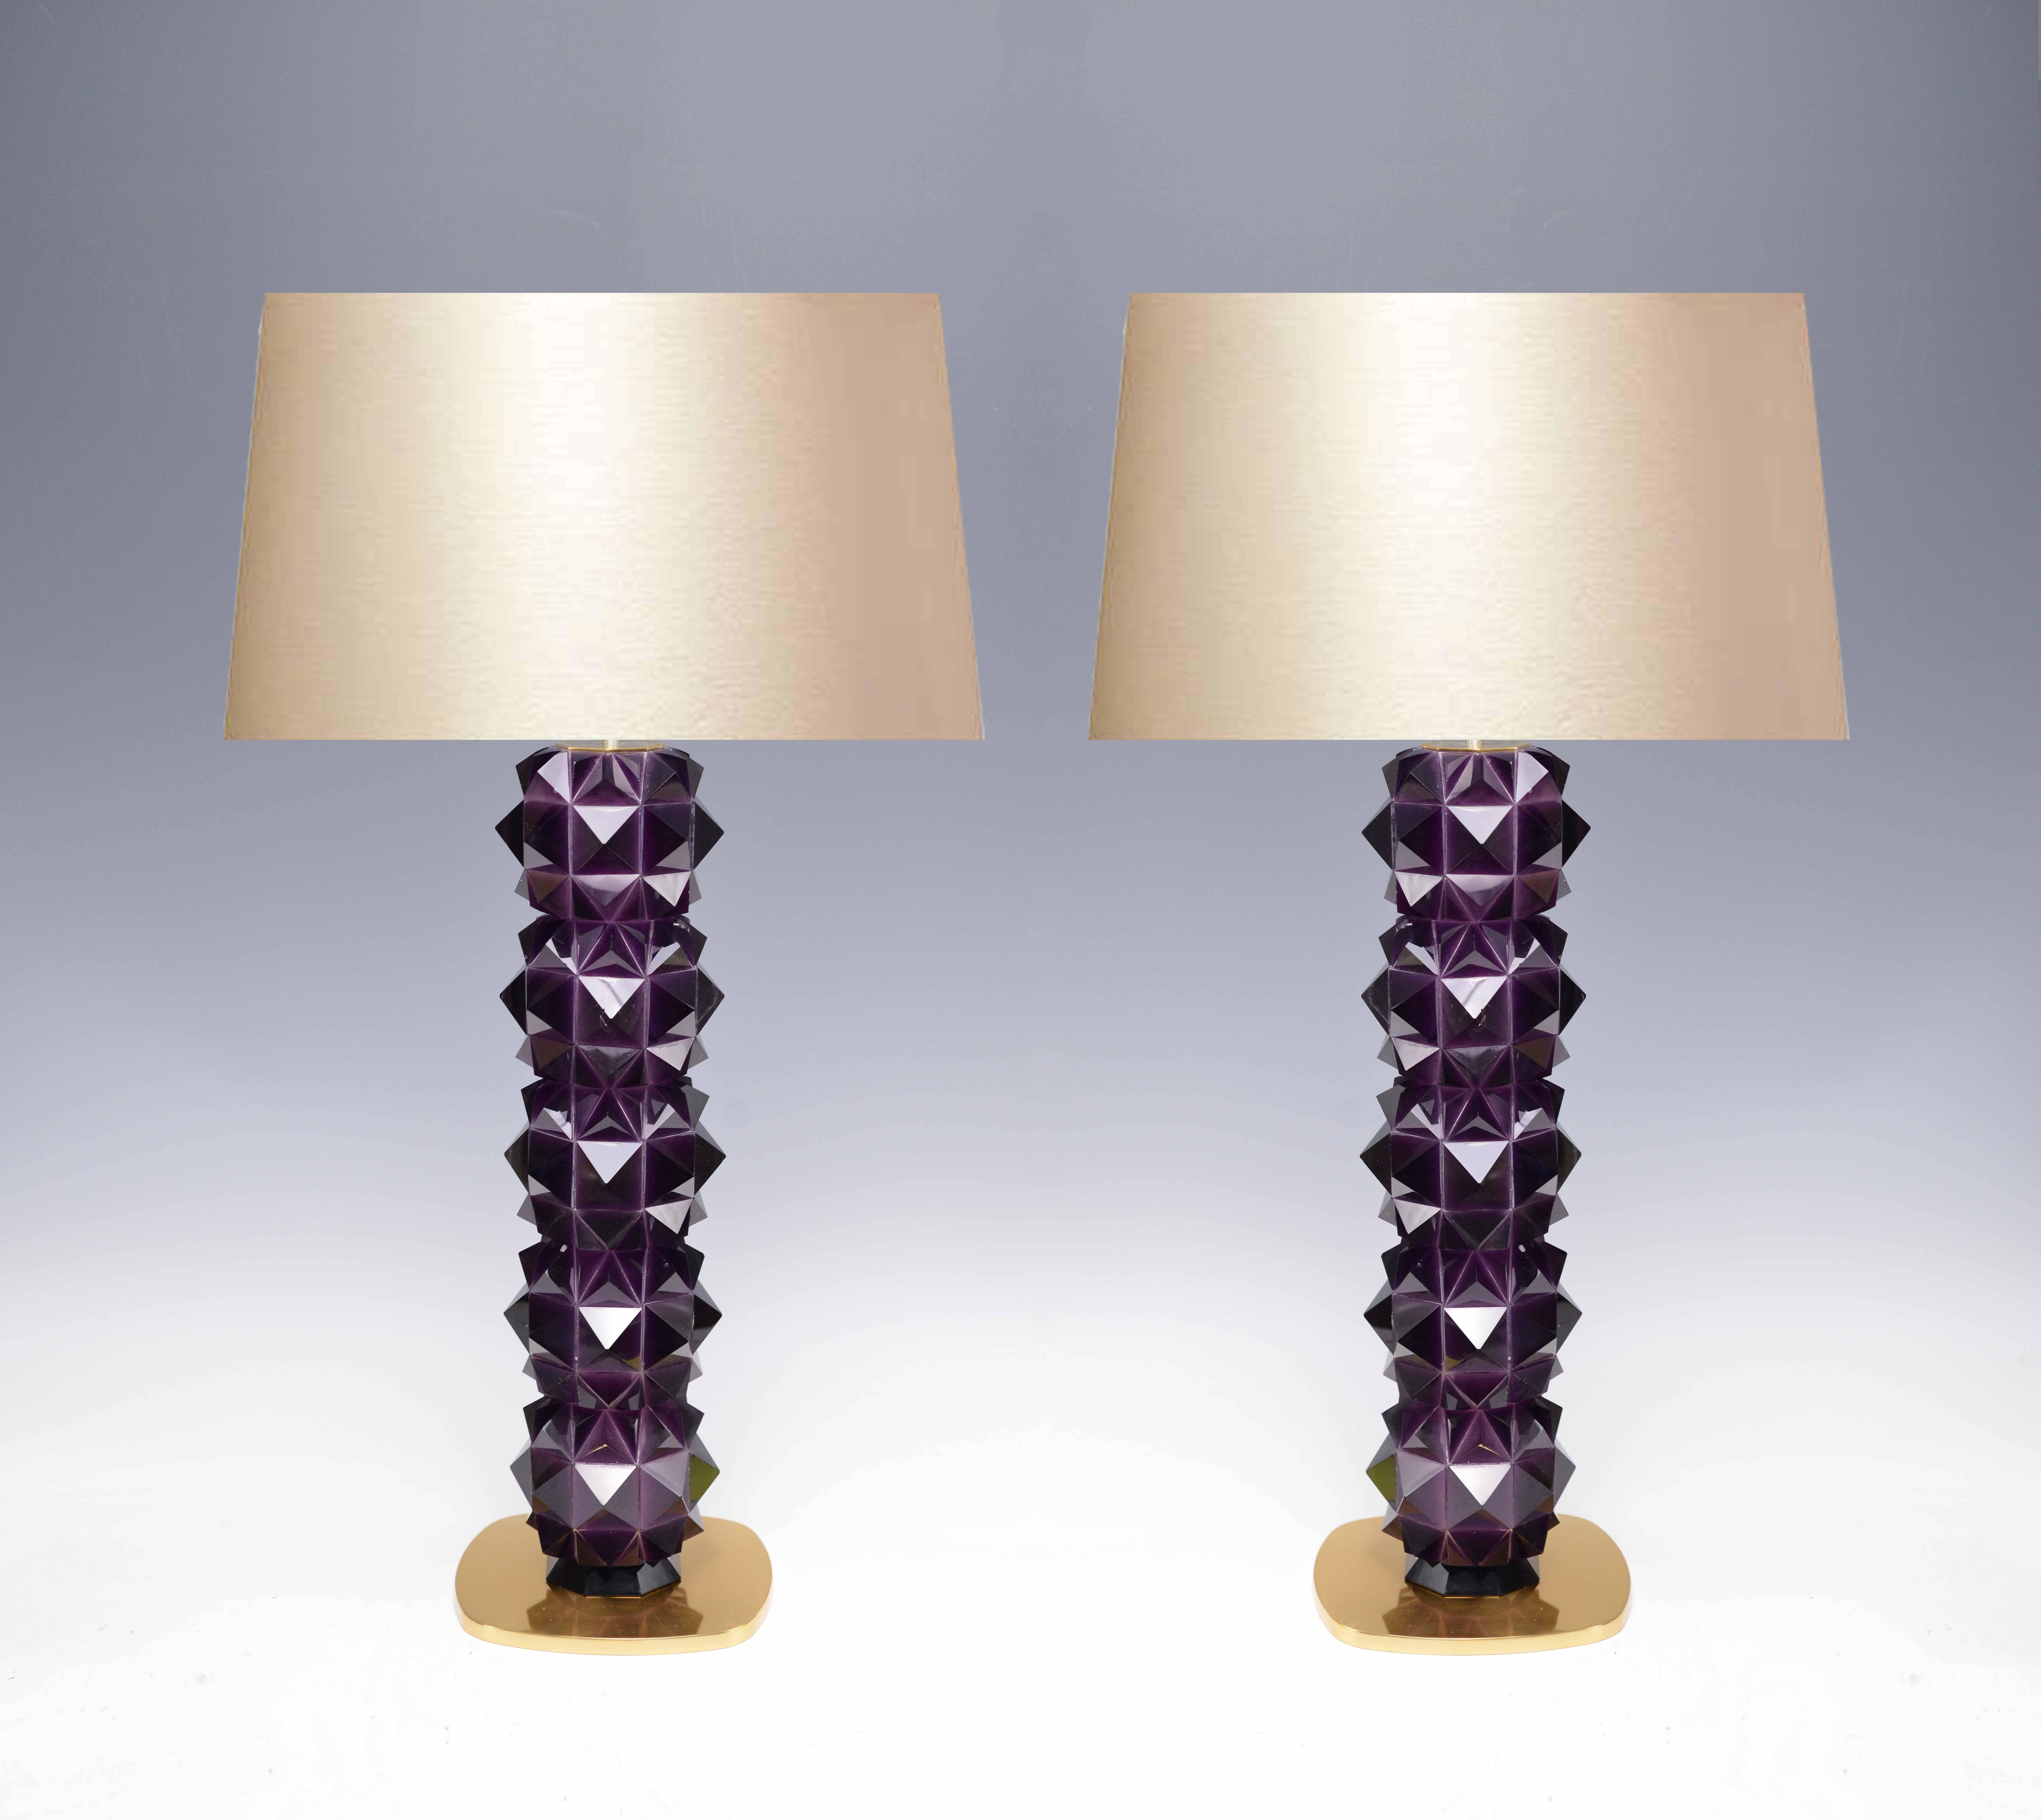 A fine carved faceted amethyst rock crystal quartz lamp with polish brass base, created by Phoenix Gallery, NYC.
Available in nickel plating and antique brass finished. 
To the rock crystal top: 18.5